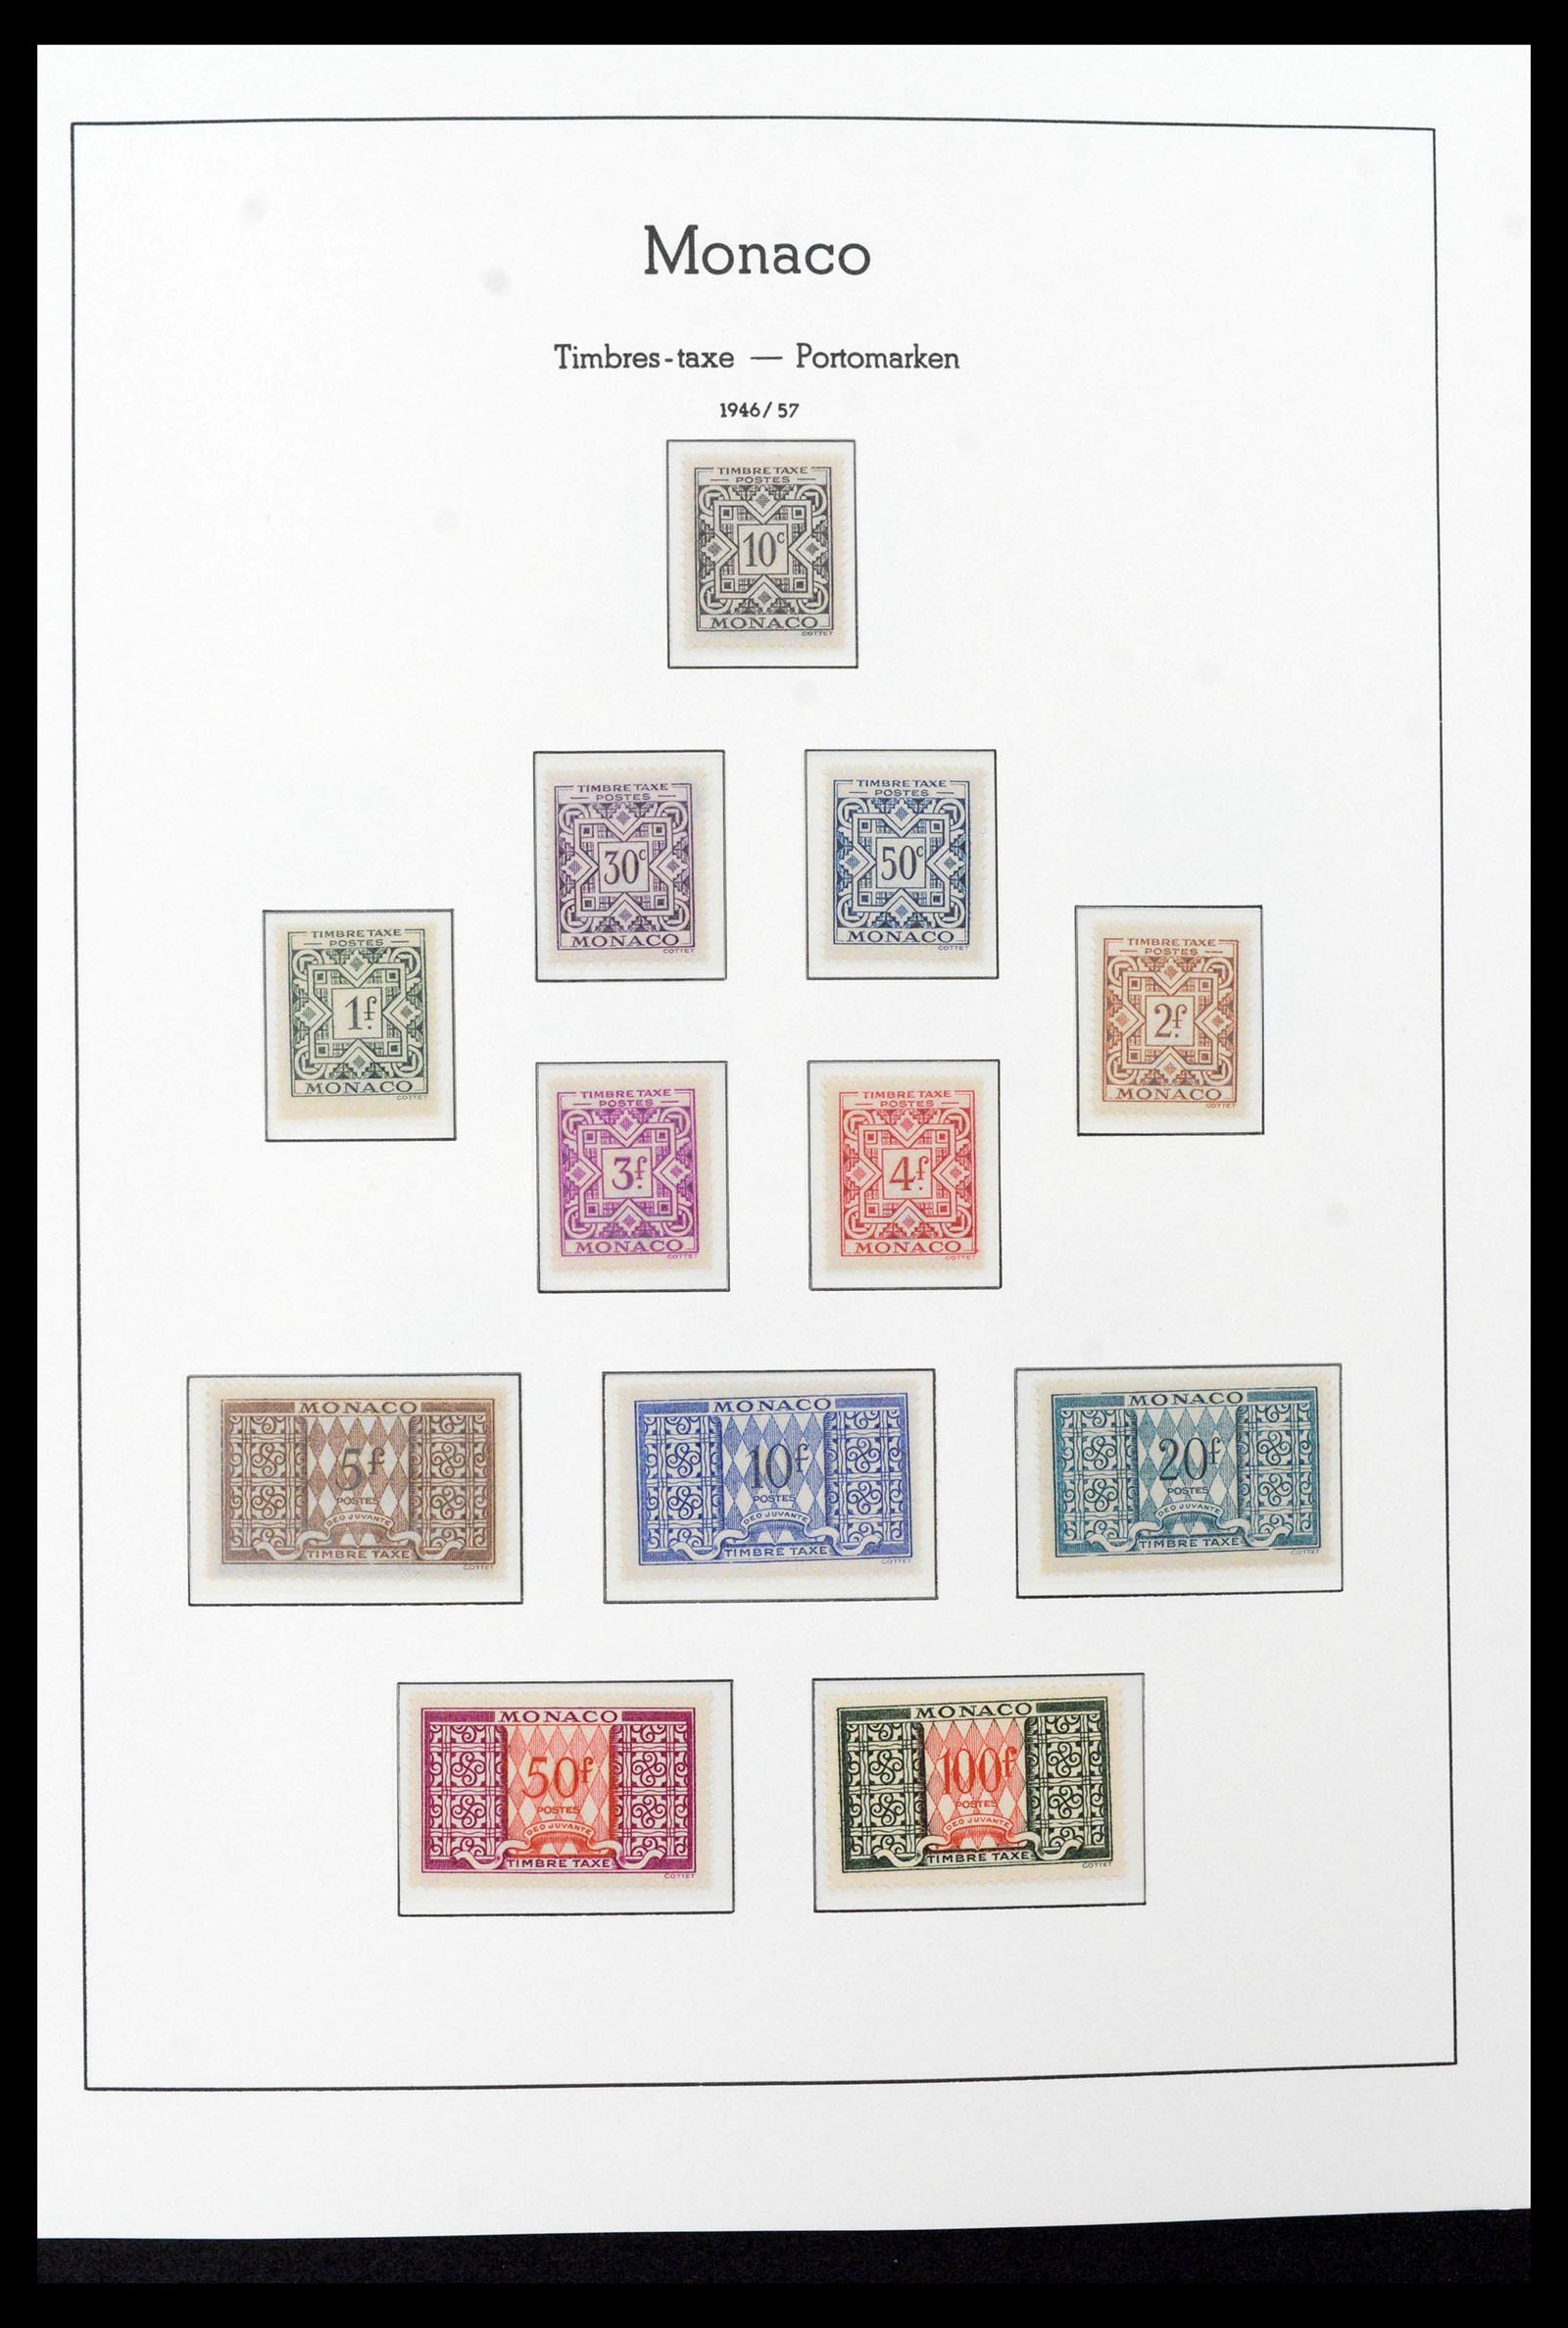 39390 0032 - Stamp collection 39390 Monaco complete 1885-1990.